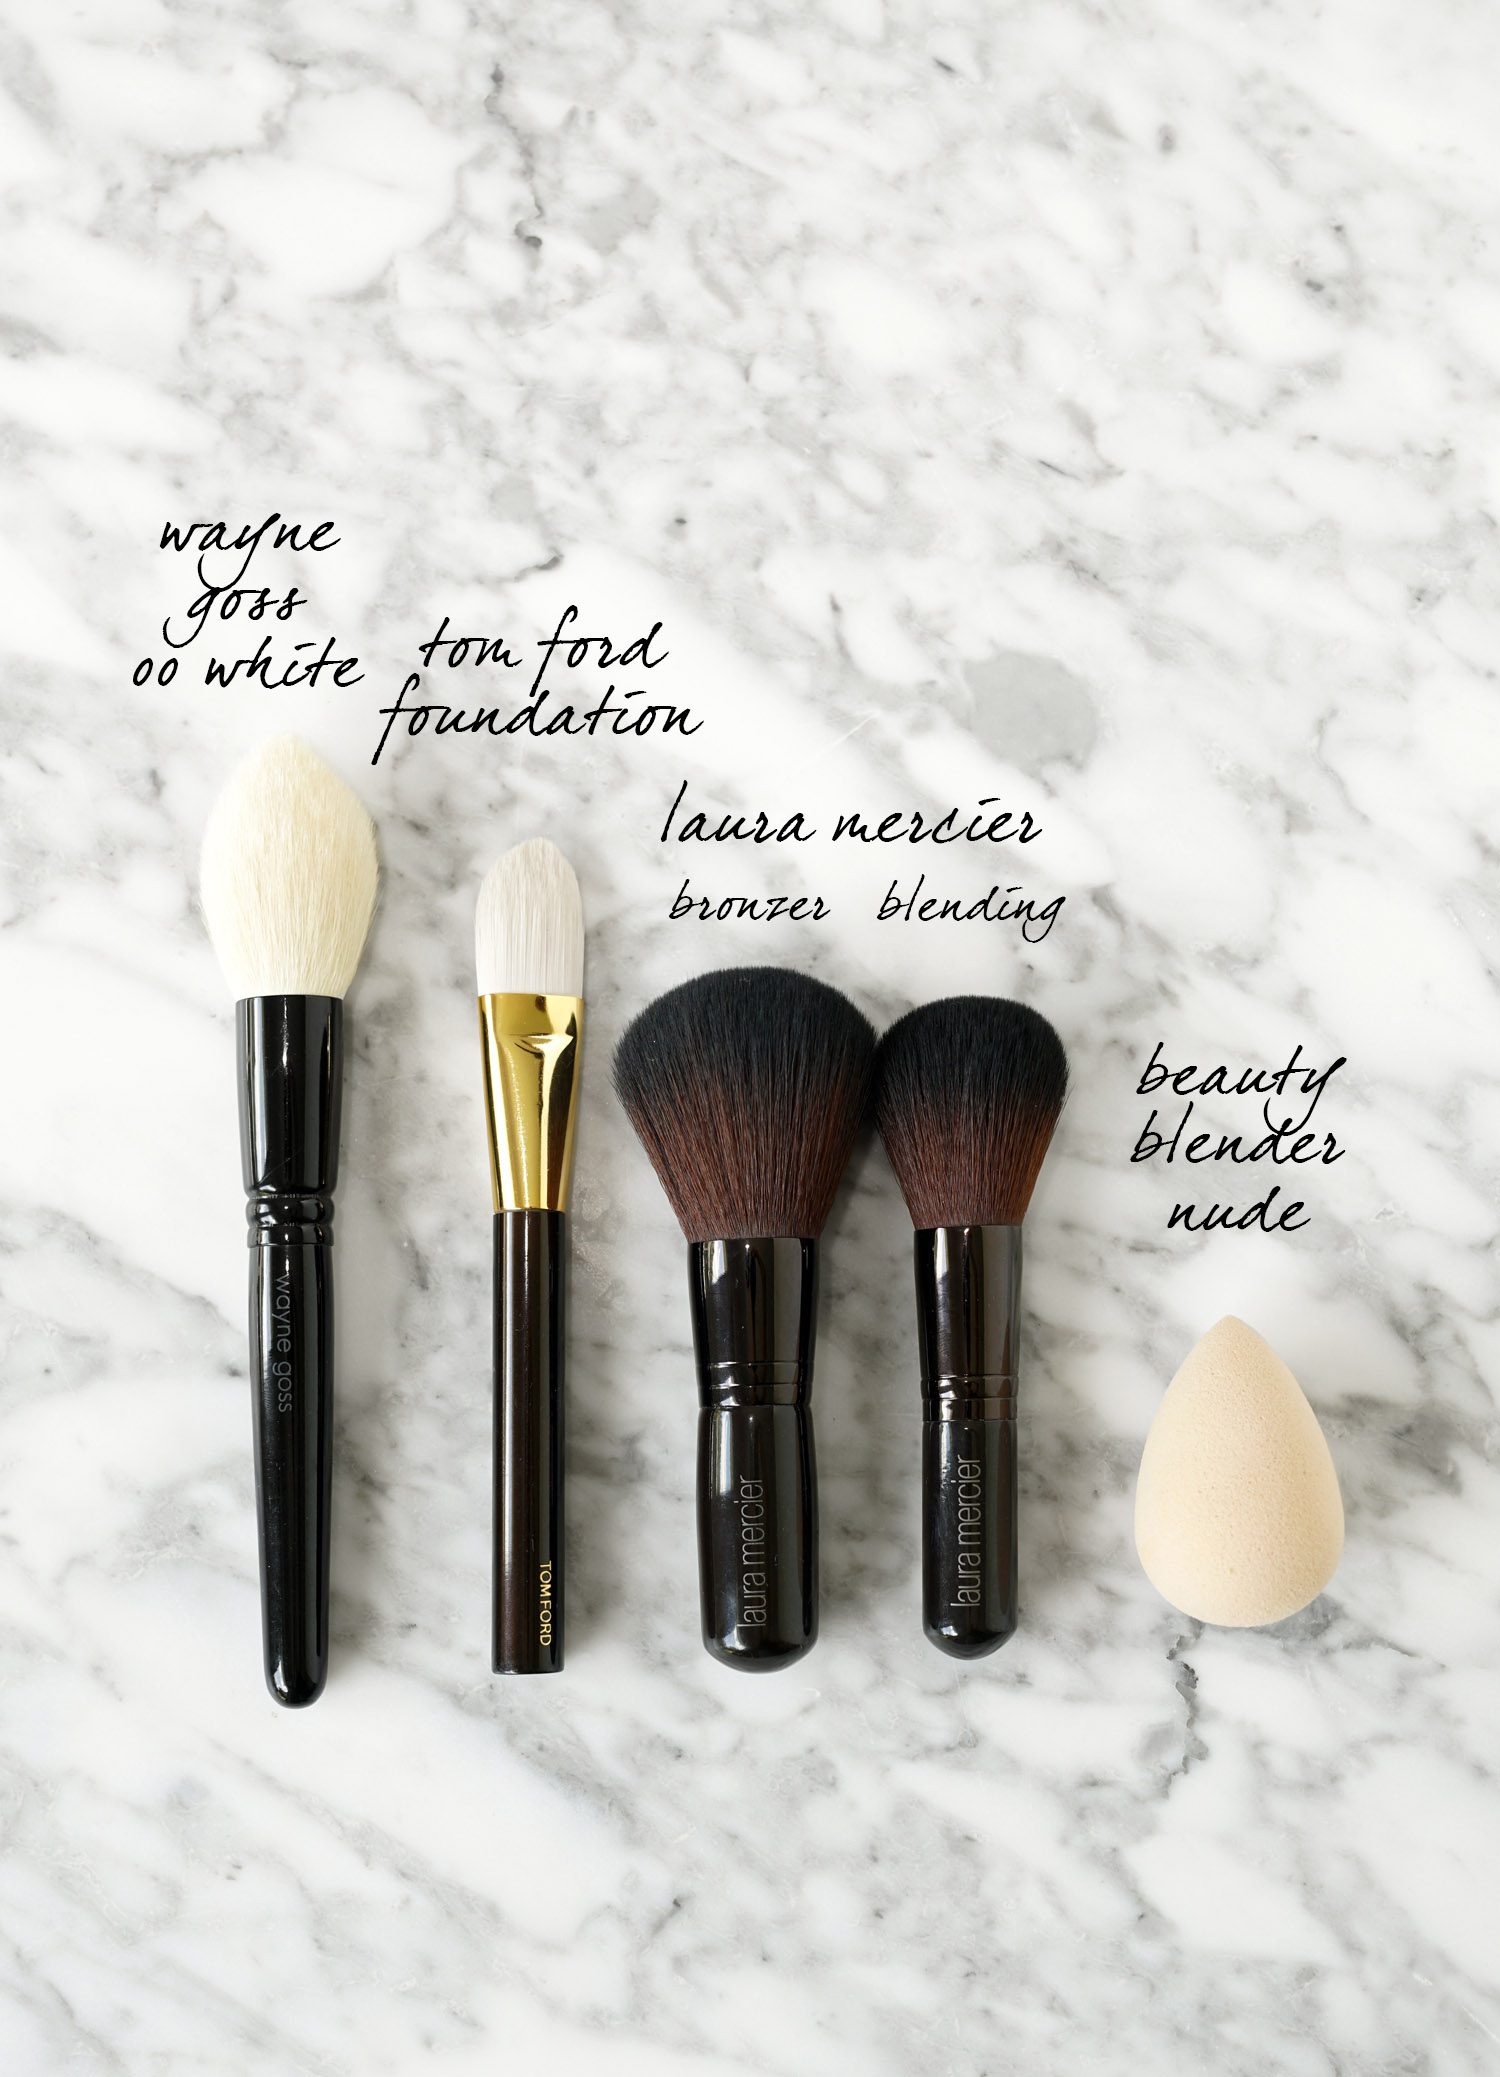 Makeup Brushes Archives - The Beauty Look Book